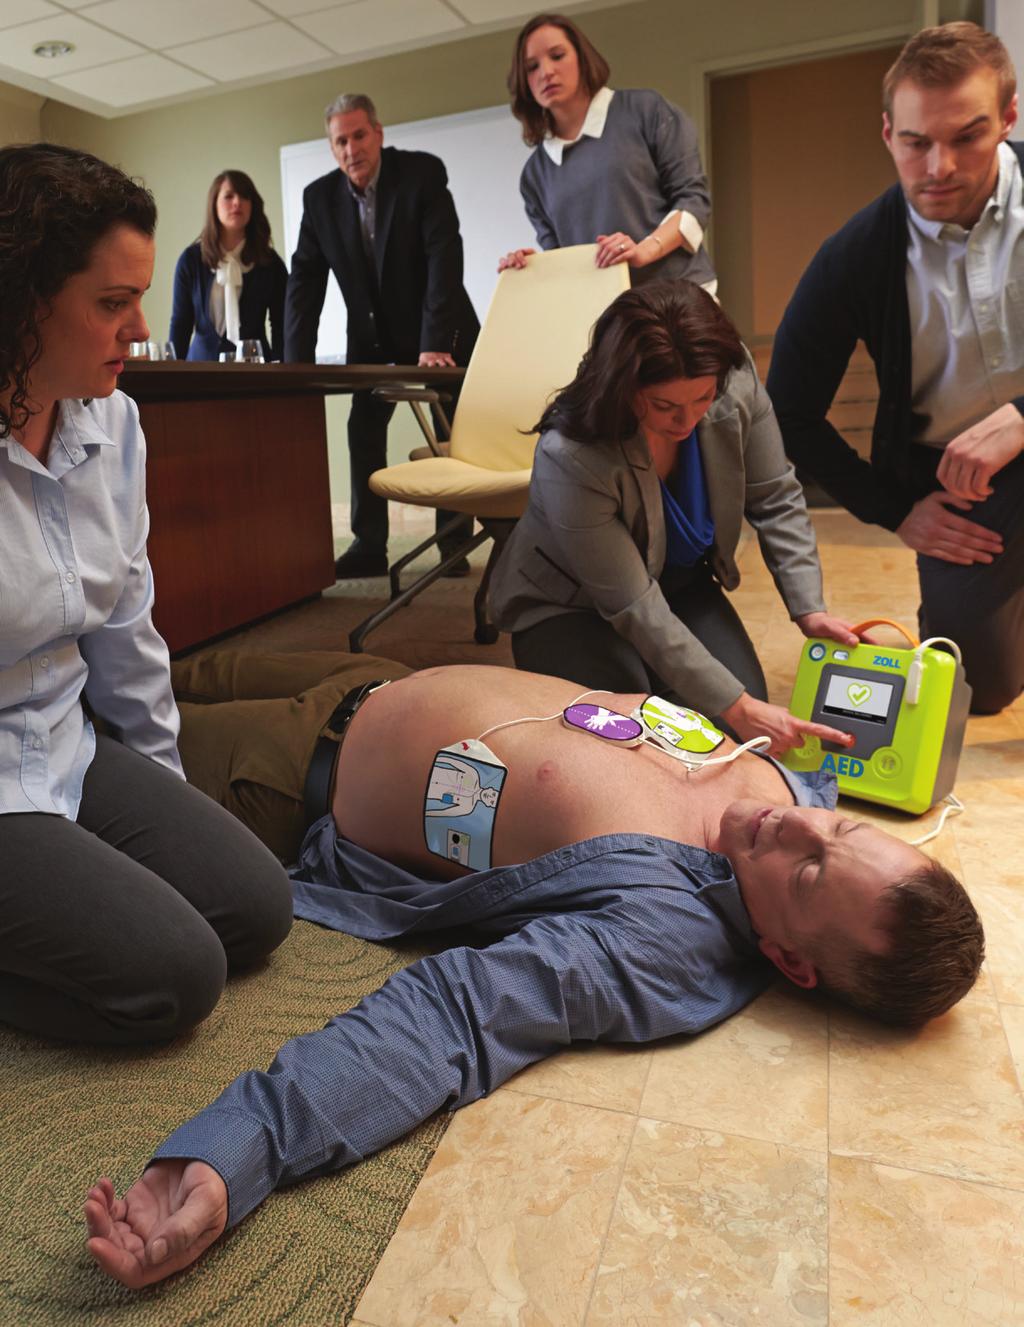 Research has shown ZOLL defibrillators equipped with Real CPR Help - providing real-time feedback for depth and rate of chest